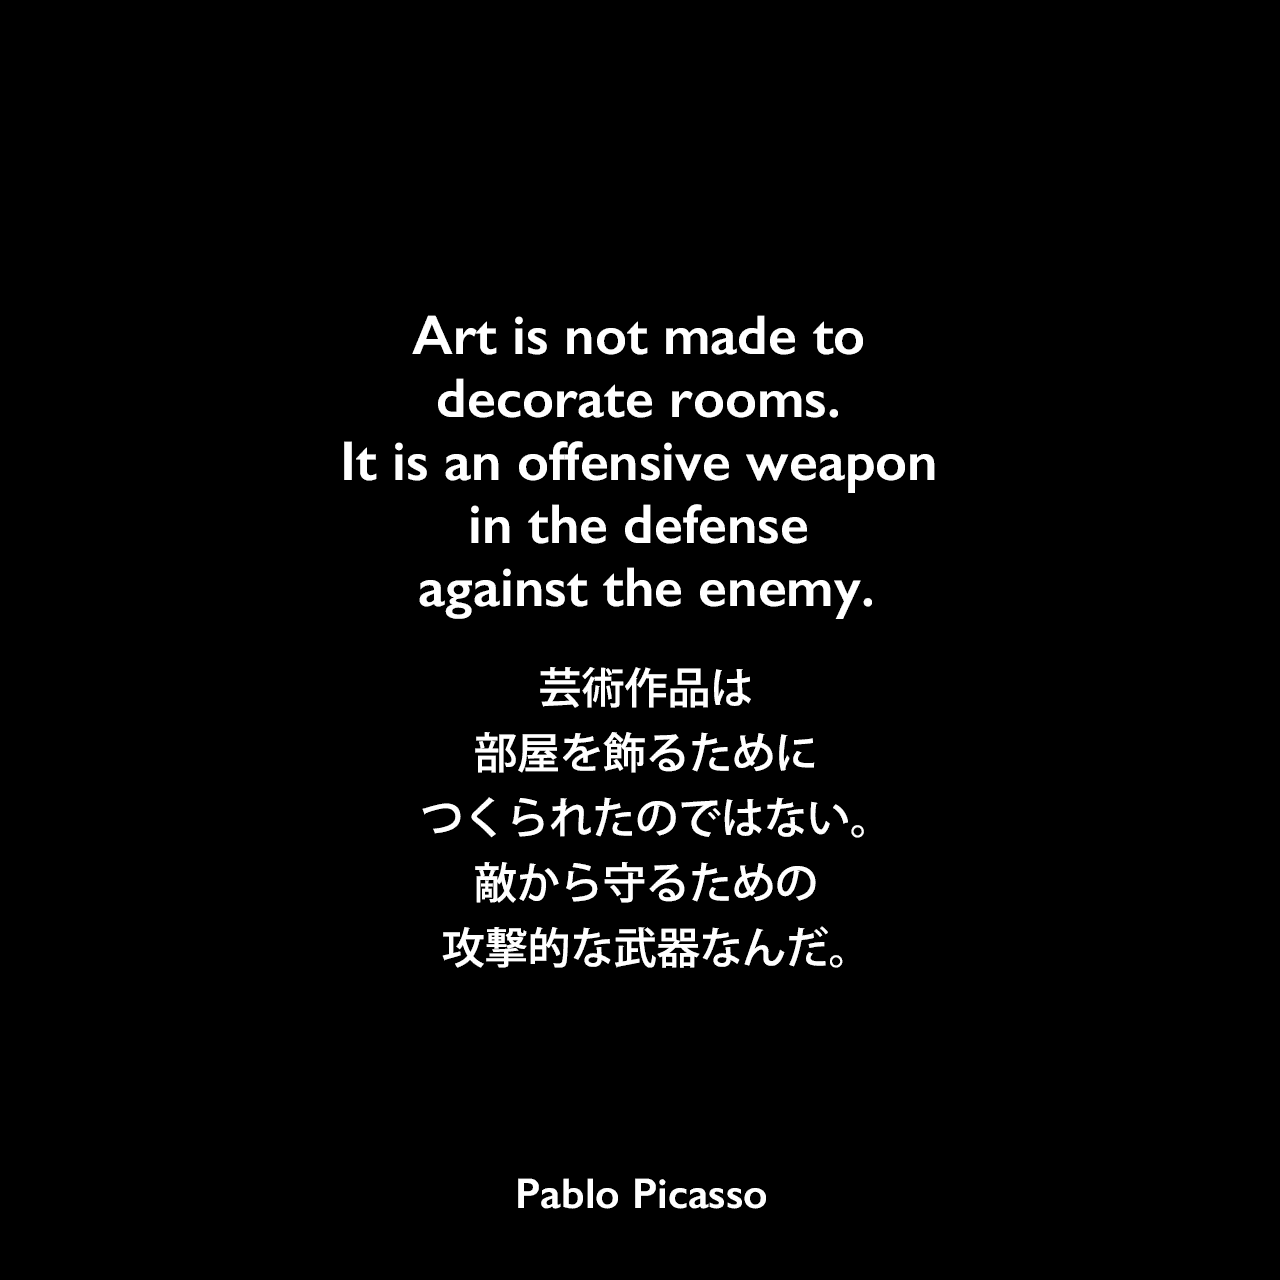 Art is not made to decorate rooms. It is an offensive weapon in the defense against the enemy.芸術作品は、部屋を飾るためにつくられたのではない。敵から守るための攻撃的な武器なんだ。- 1943年ピカソの手紙よりPablo Picasso